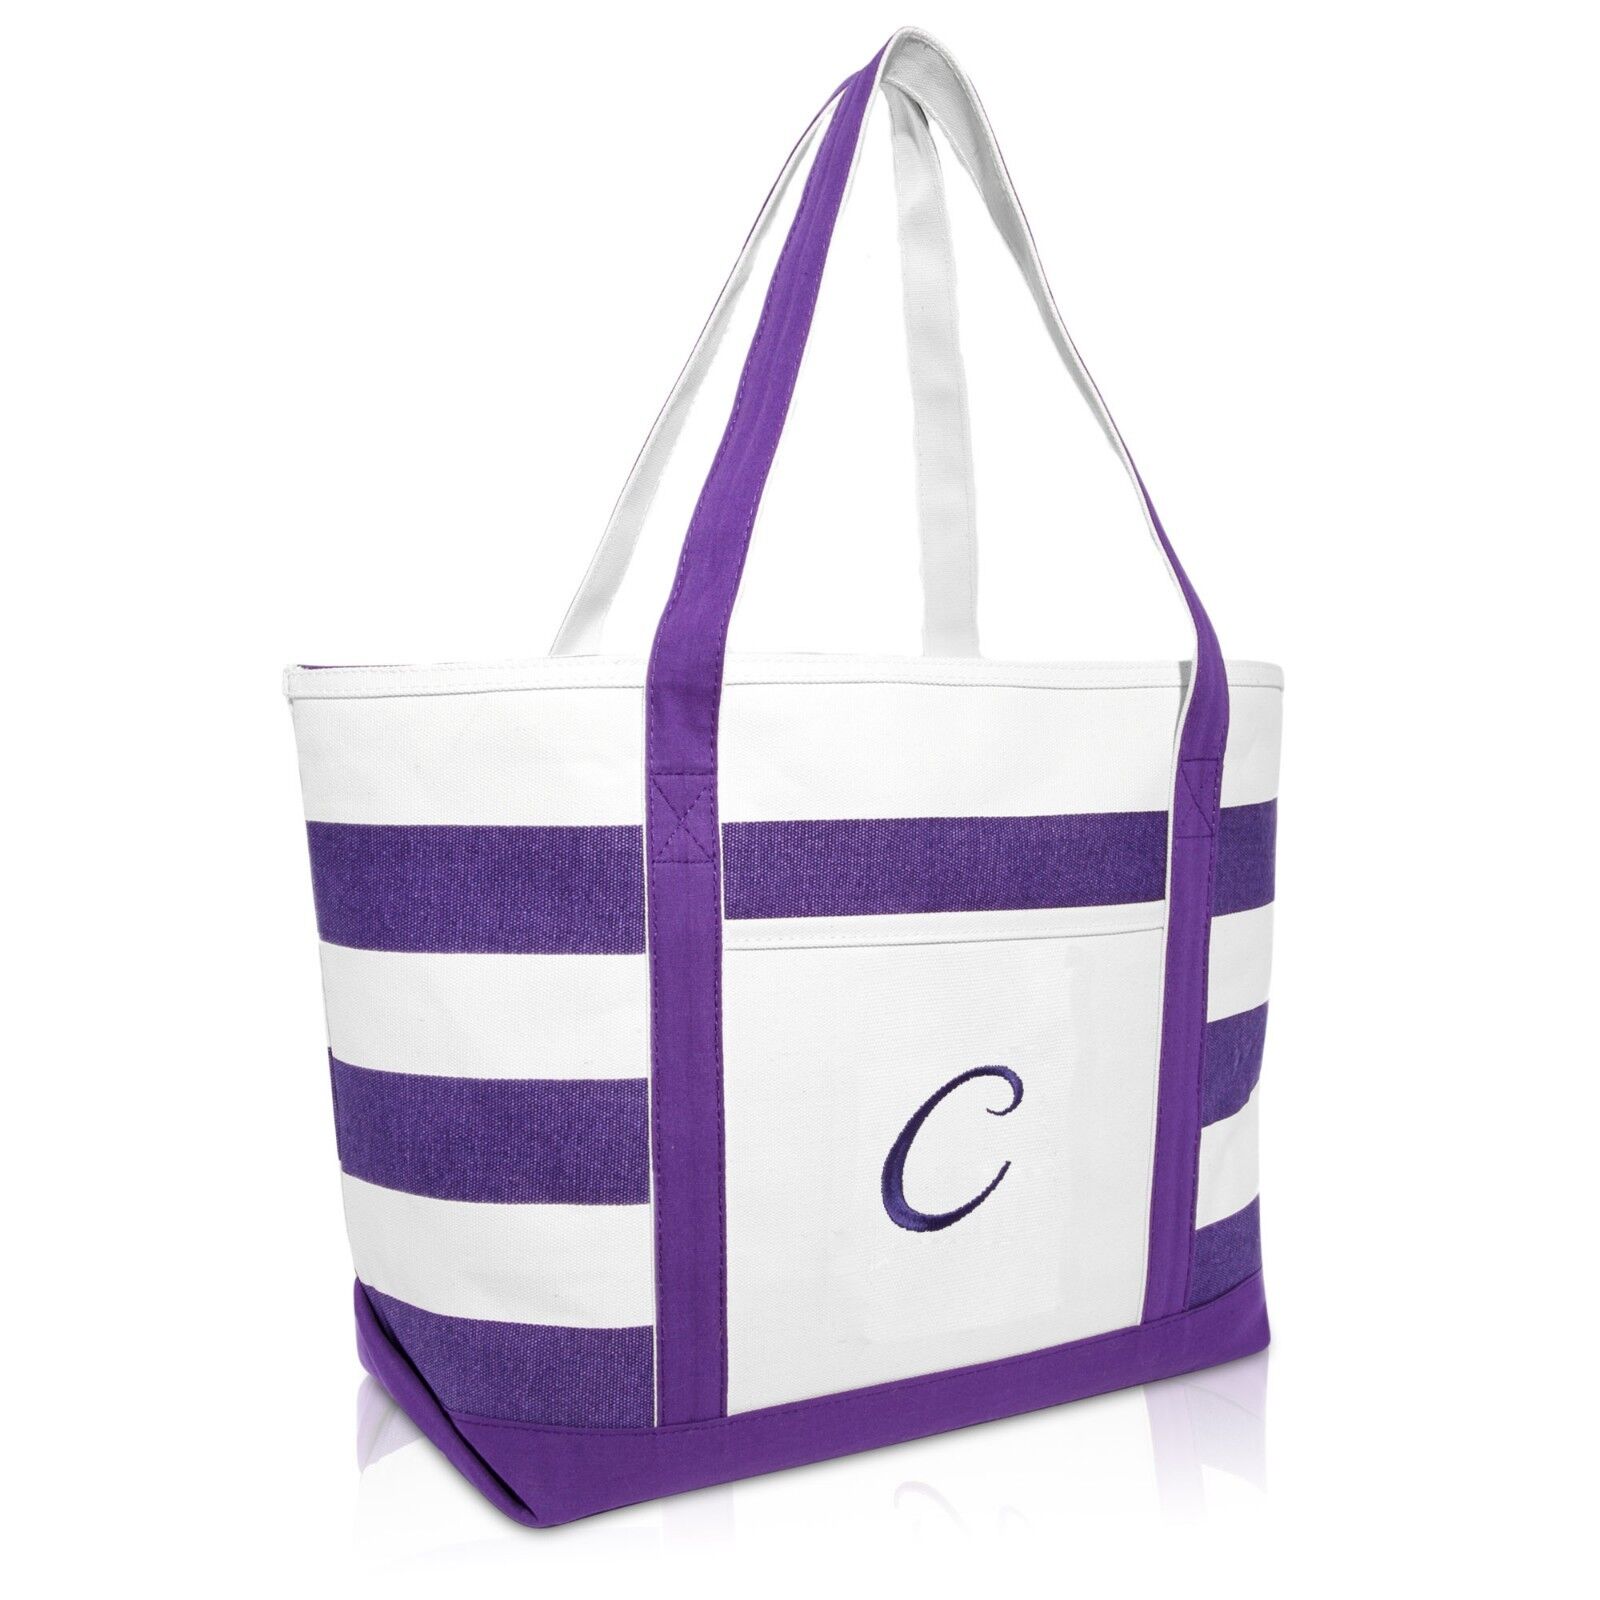 And Totes For Women Personalized Gifts Purple A-z